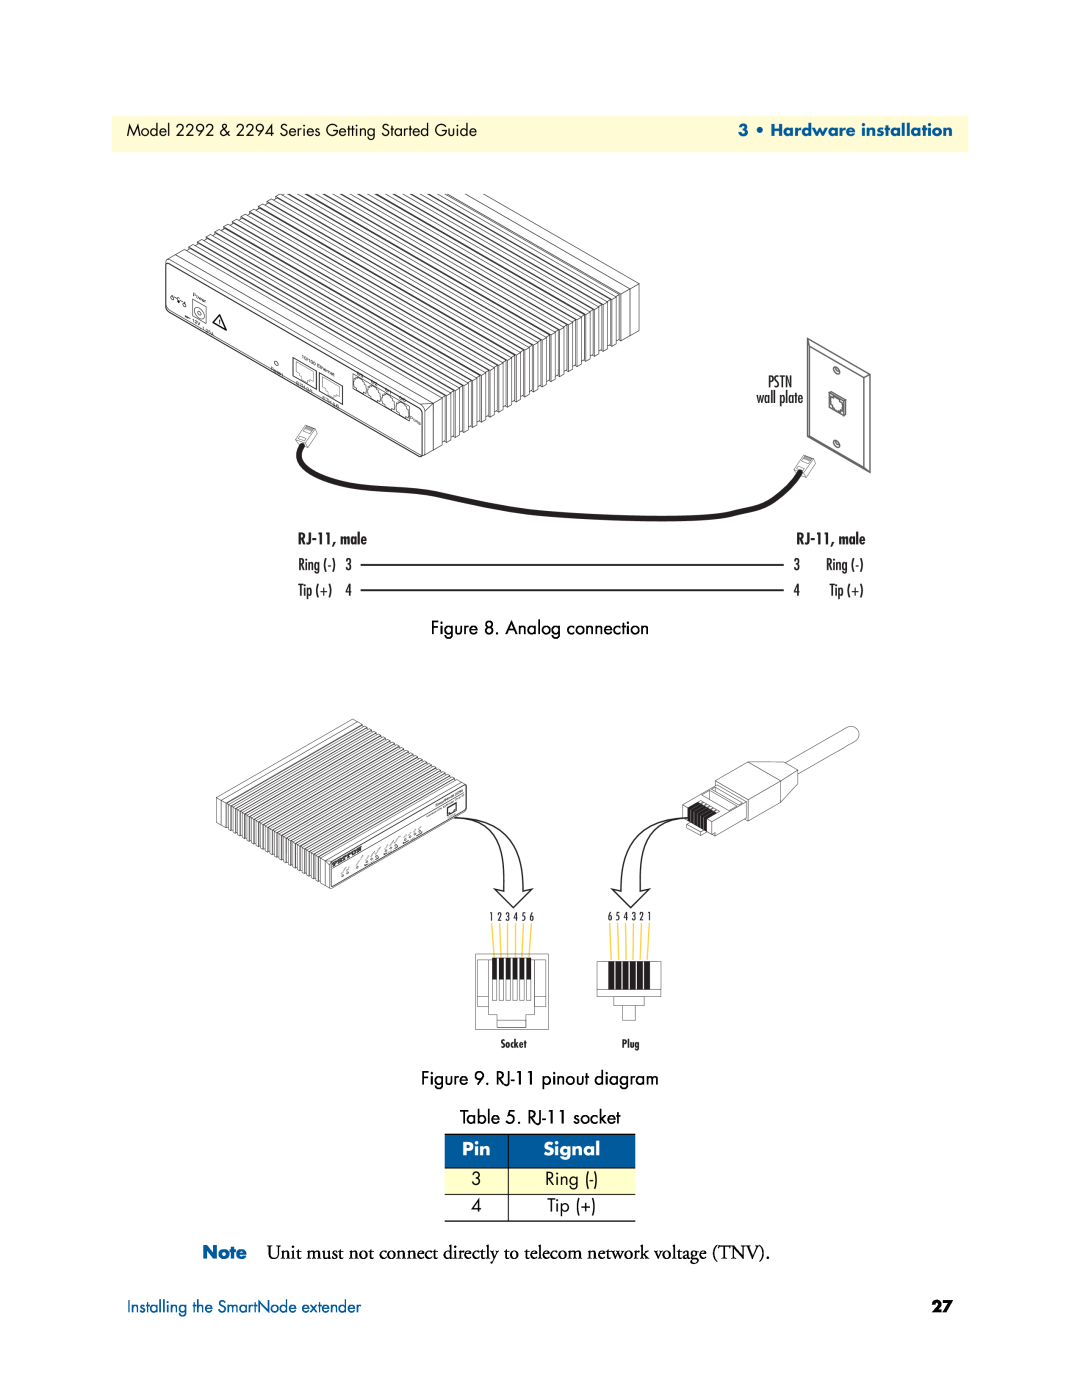 Patton electronic Signal, Model 2292 & 2294 Series Getting Started Guide, Hardware installation, PSTN wall plate, Ports 